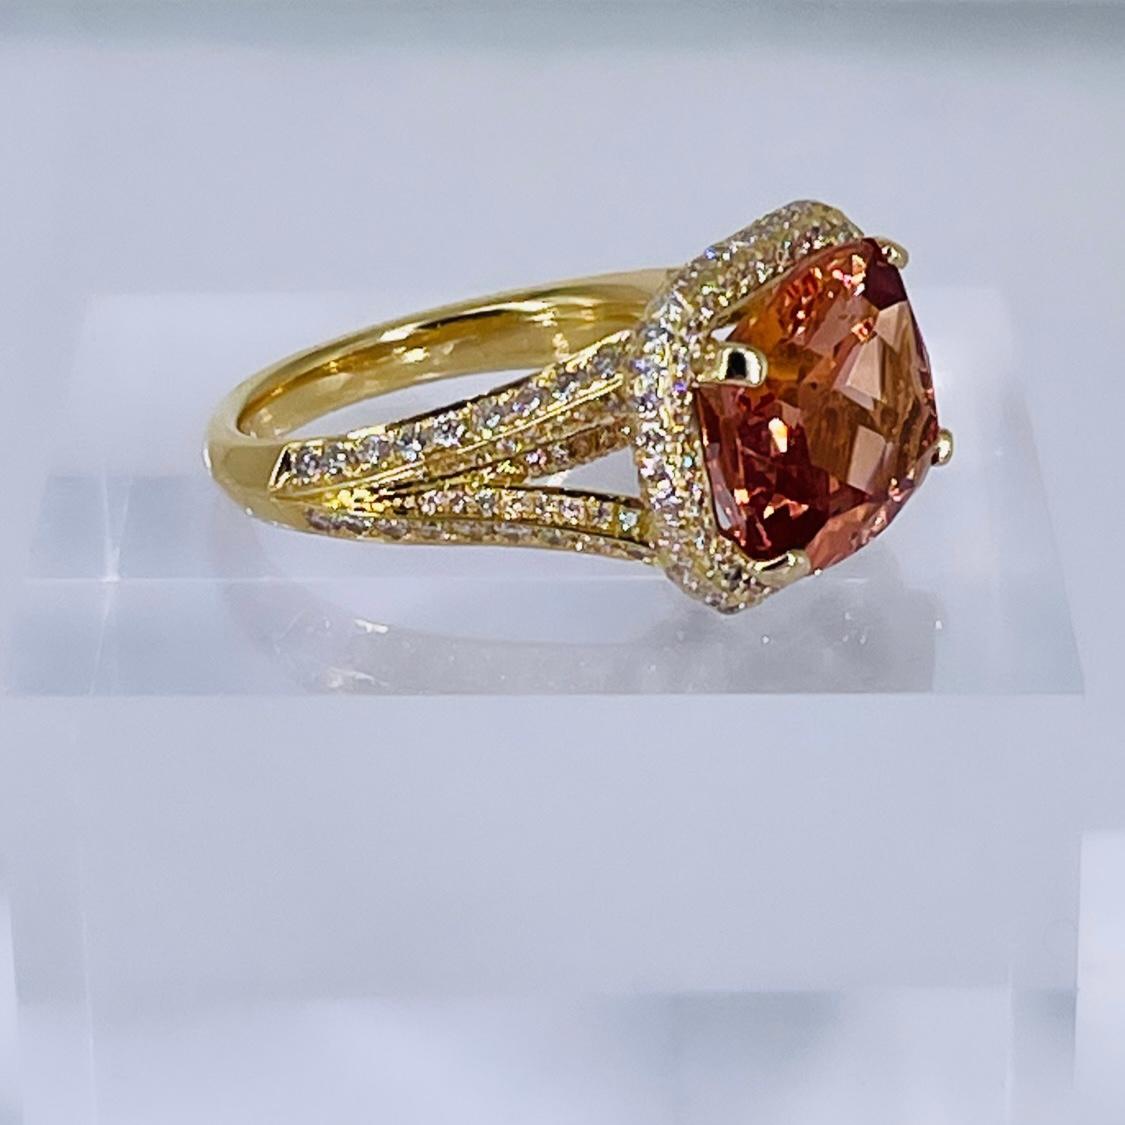 This luxurious ring by J. Birnbach is a gorgeous combination of color and sparkle. The 8.85 carat orange elongated cushion cut topaz is a rich, warm orange with an even saturation and distribution of color. The topaz is framed by an exquisite halo